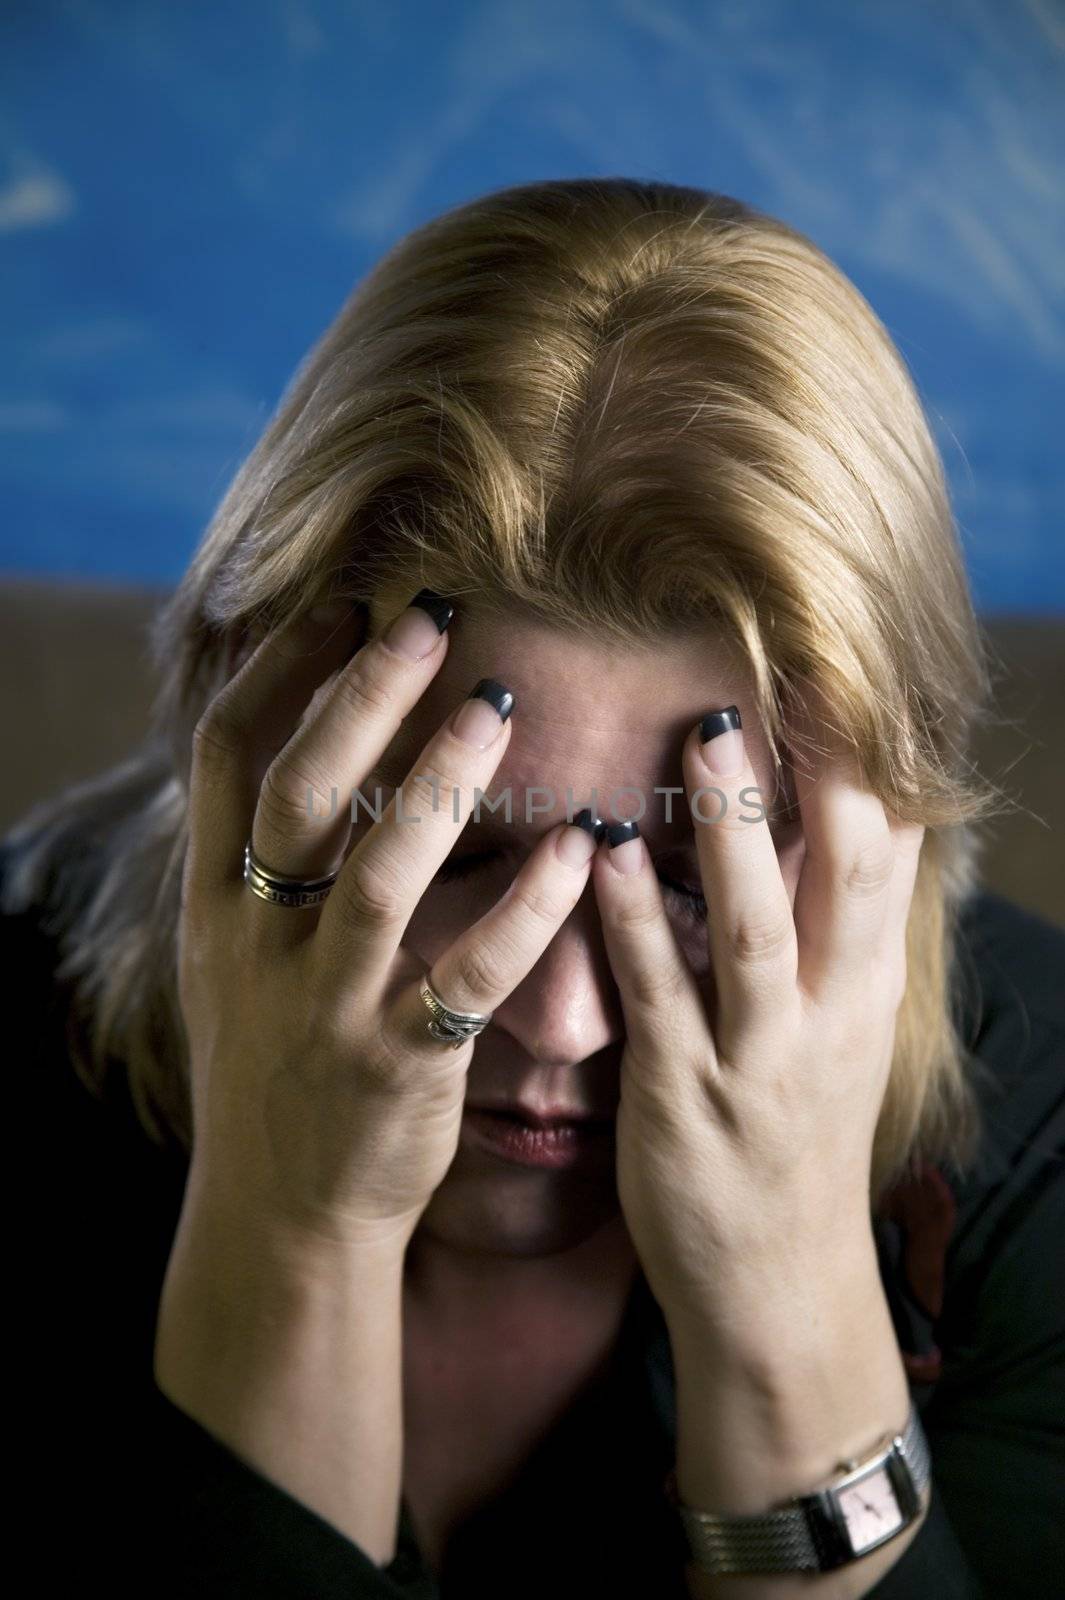 Close up of blonde woman in a studio setting hiding her face in her hands.